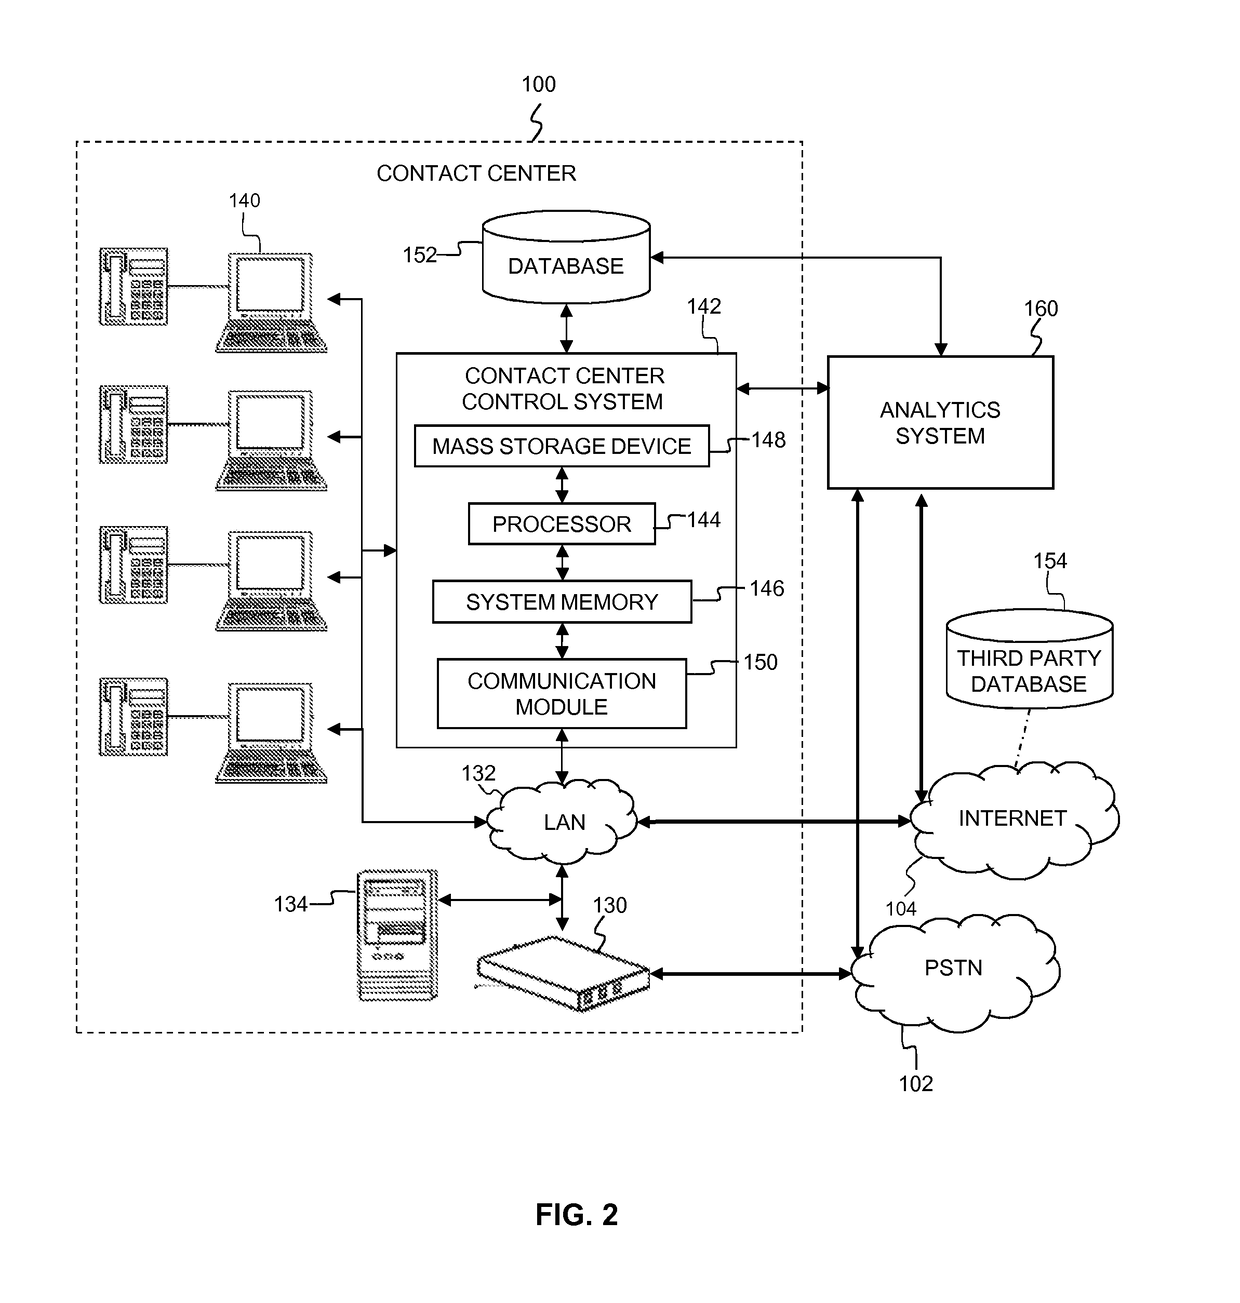 Customer-based interaction outcome prediction methods and system